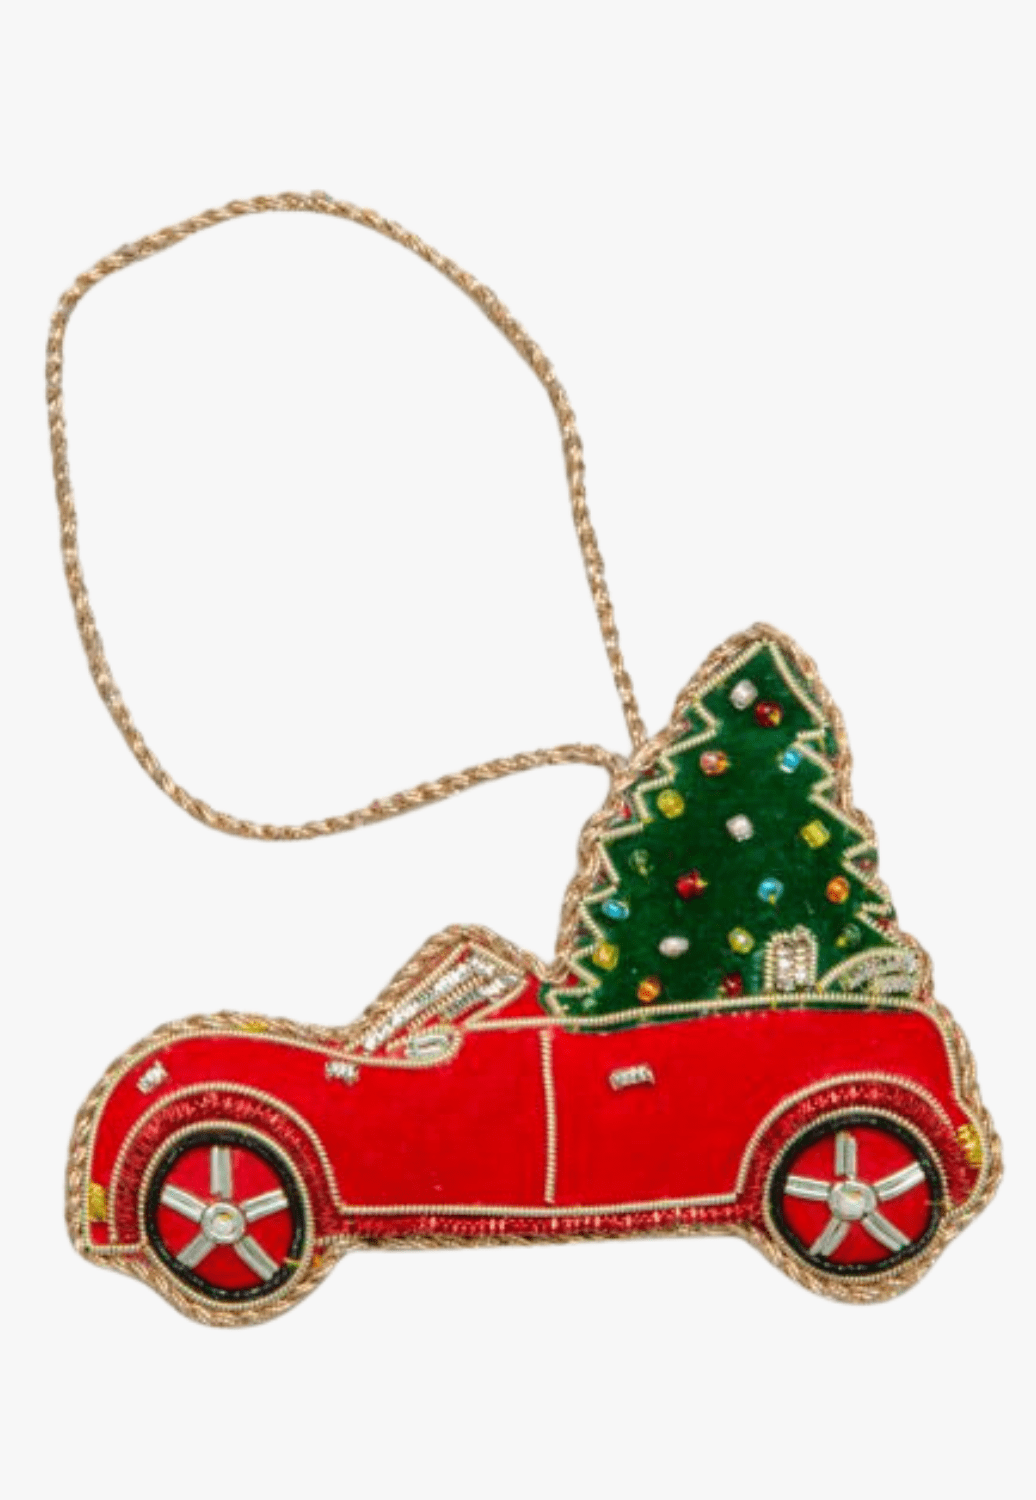 Myra Bag ACCESSORIES-General Red/Green Myra Bag Driving Home To Christmas Ornament